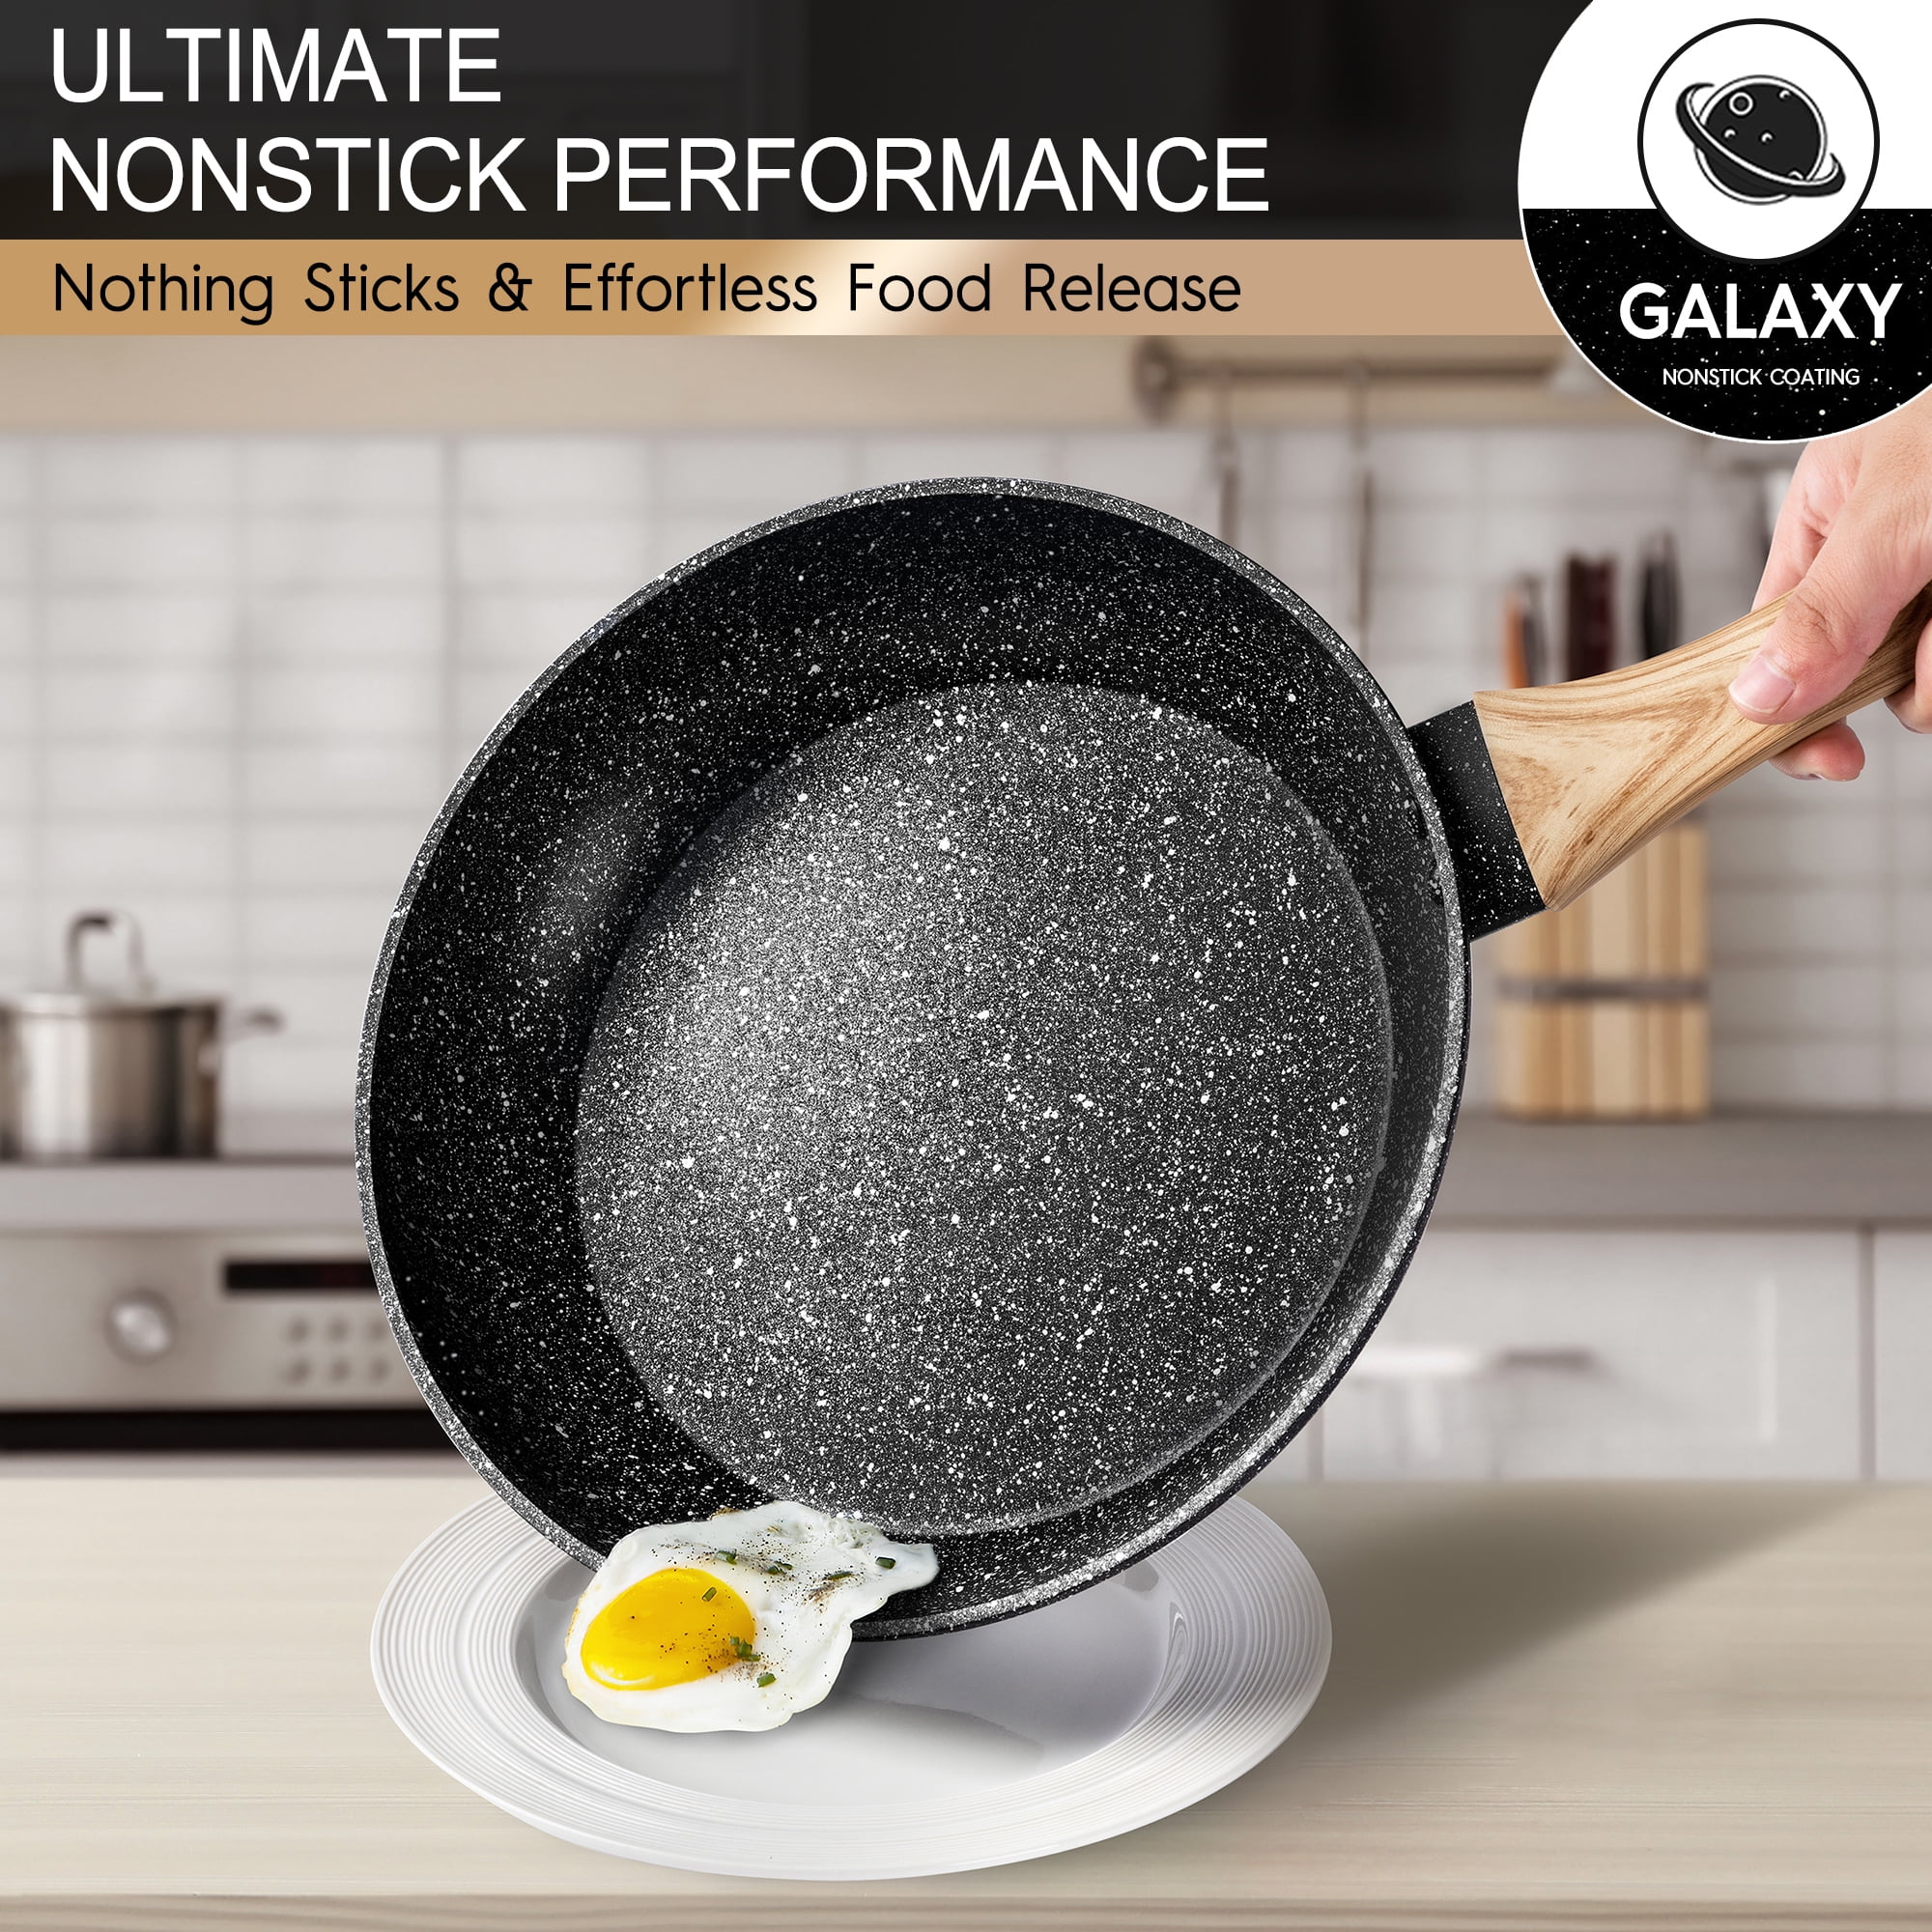 HLAFRG 10 Inch Nonstick Frying Pan with Lid,Blue Marble Skillet  Stone-Derived Coating, APEO & PFOA Free, with Ergonomic Stainless Steel  Handle, Oven